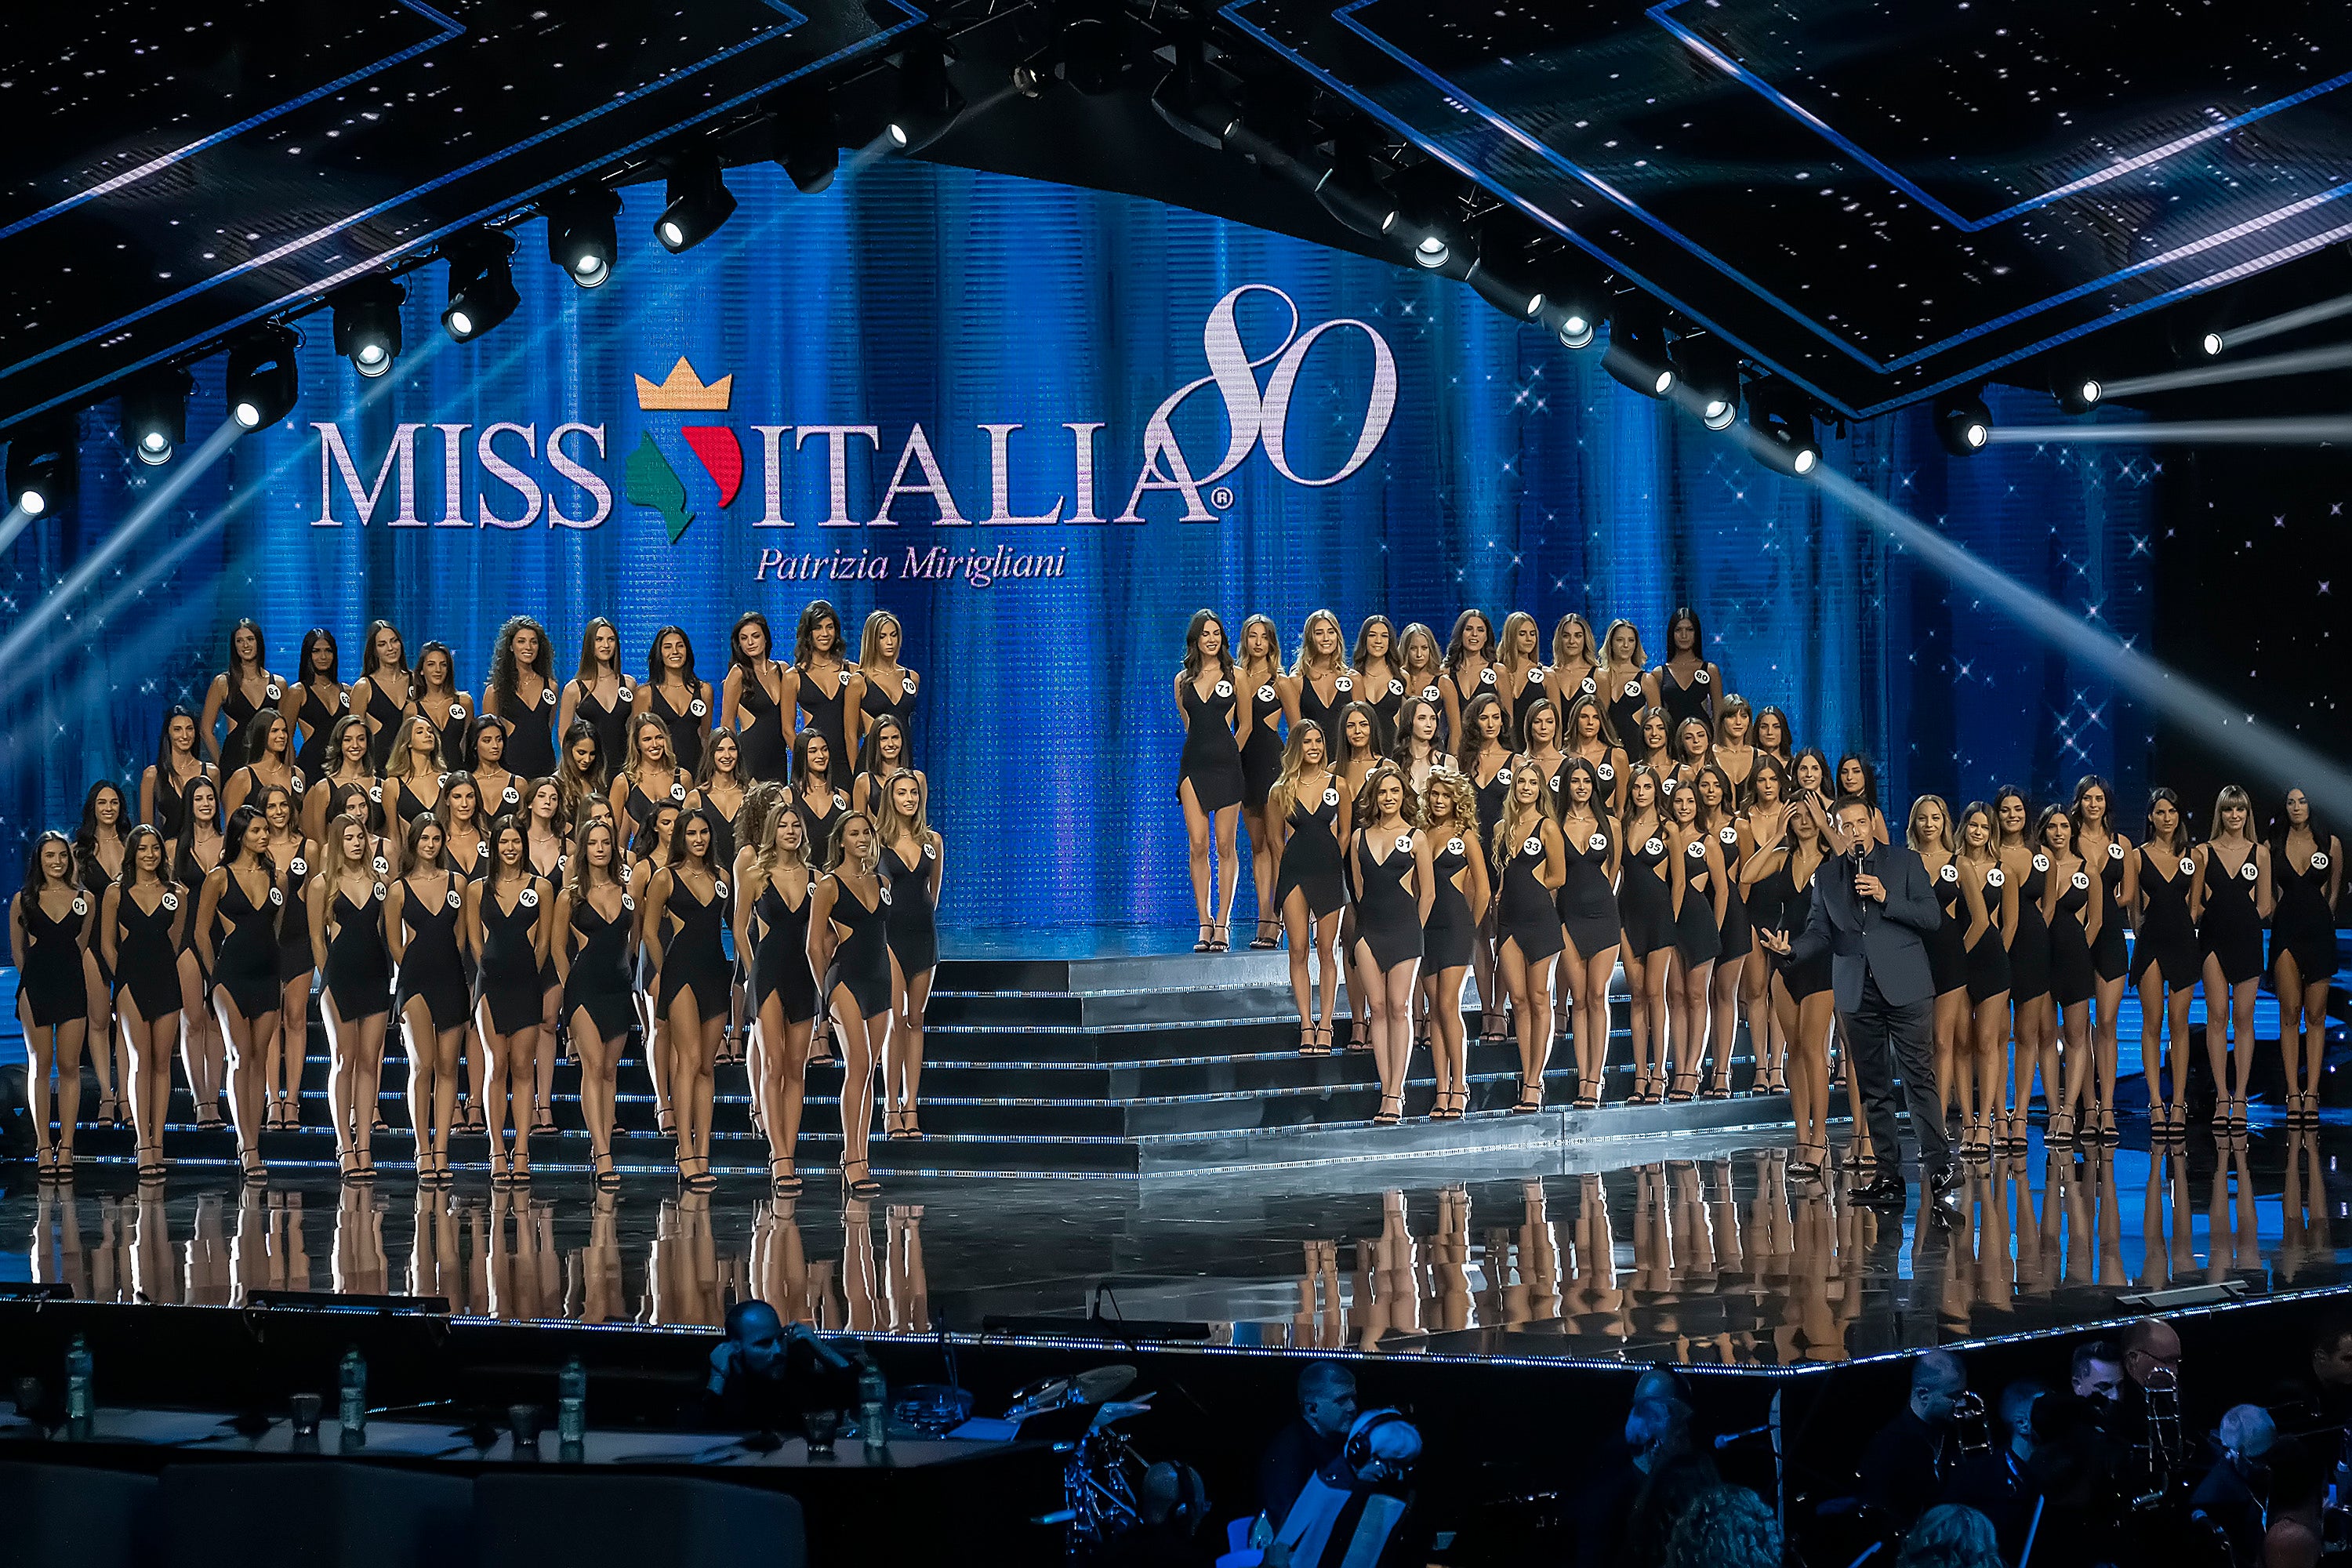 Protest brings over 100 trans men into Miss Italy pageant after trans women ban: 'Think better next time'